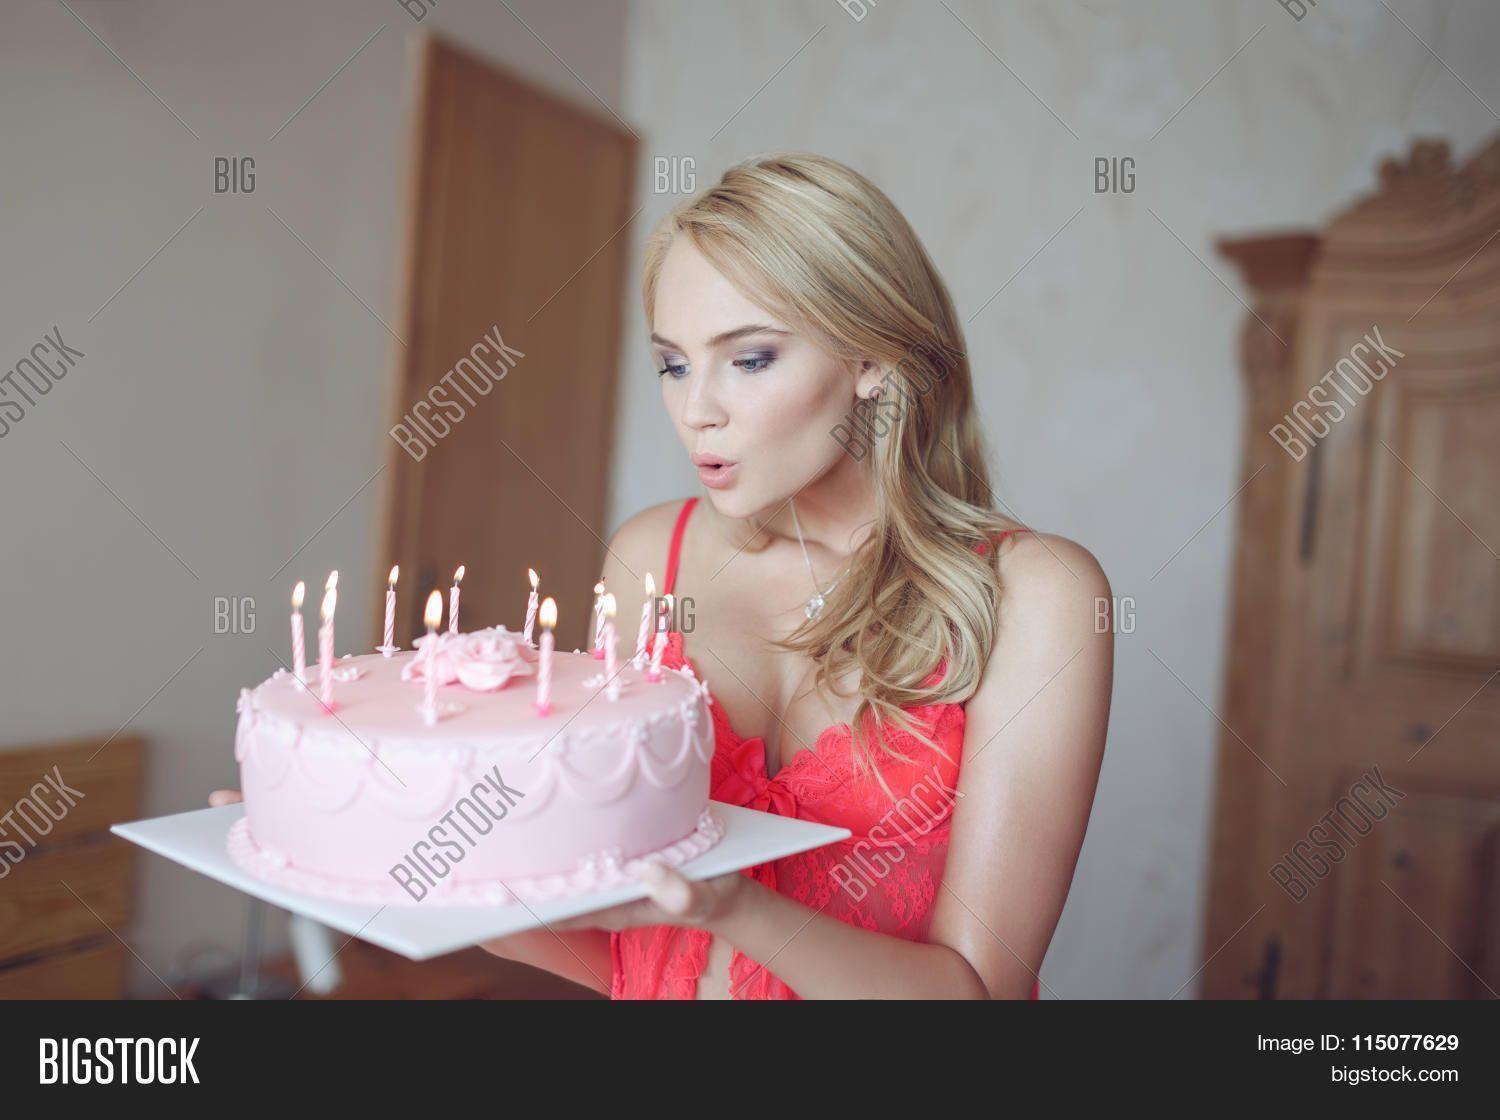 Sexy girl blowing a candle